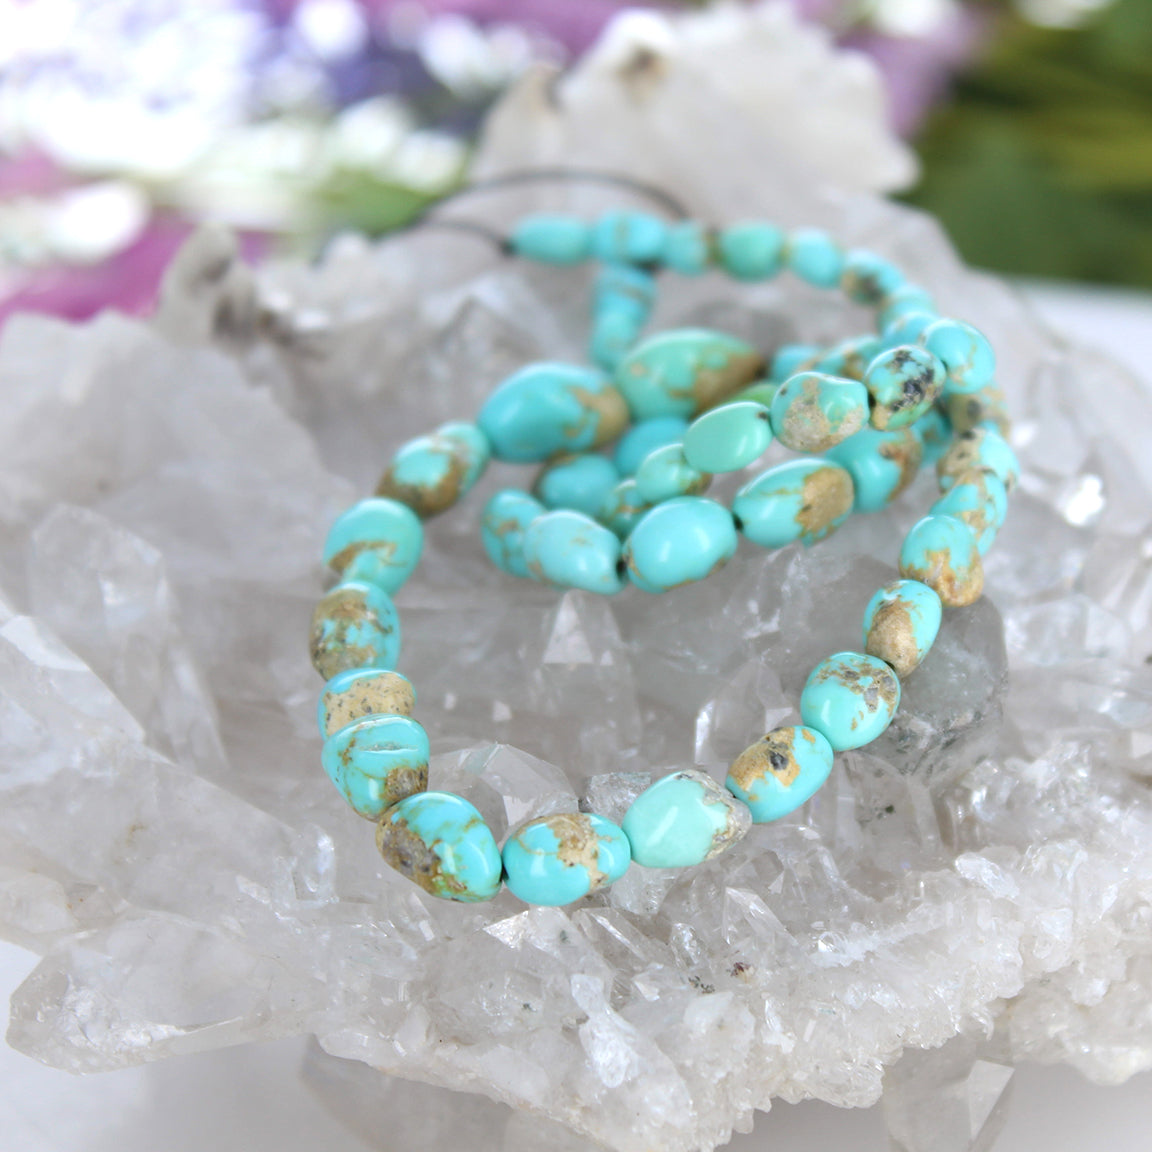 Sonoran Gold Turquoise Beads Bright Blue 6-10mm 16"